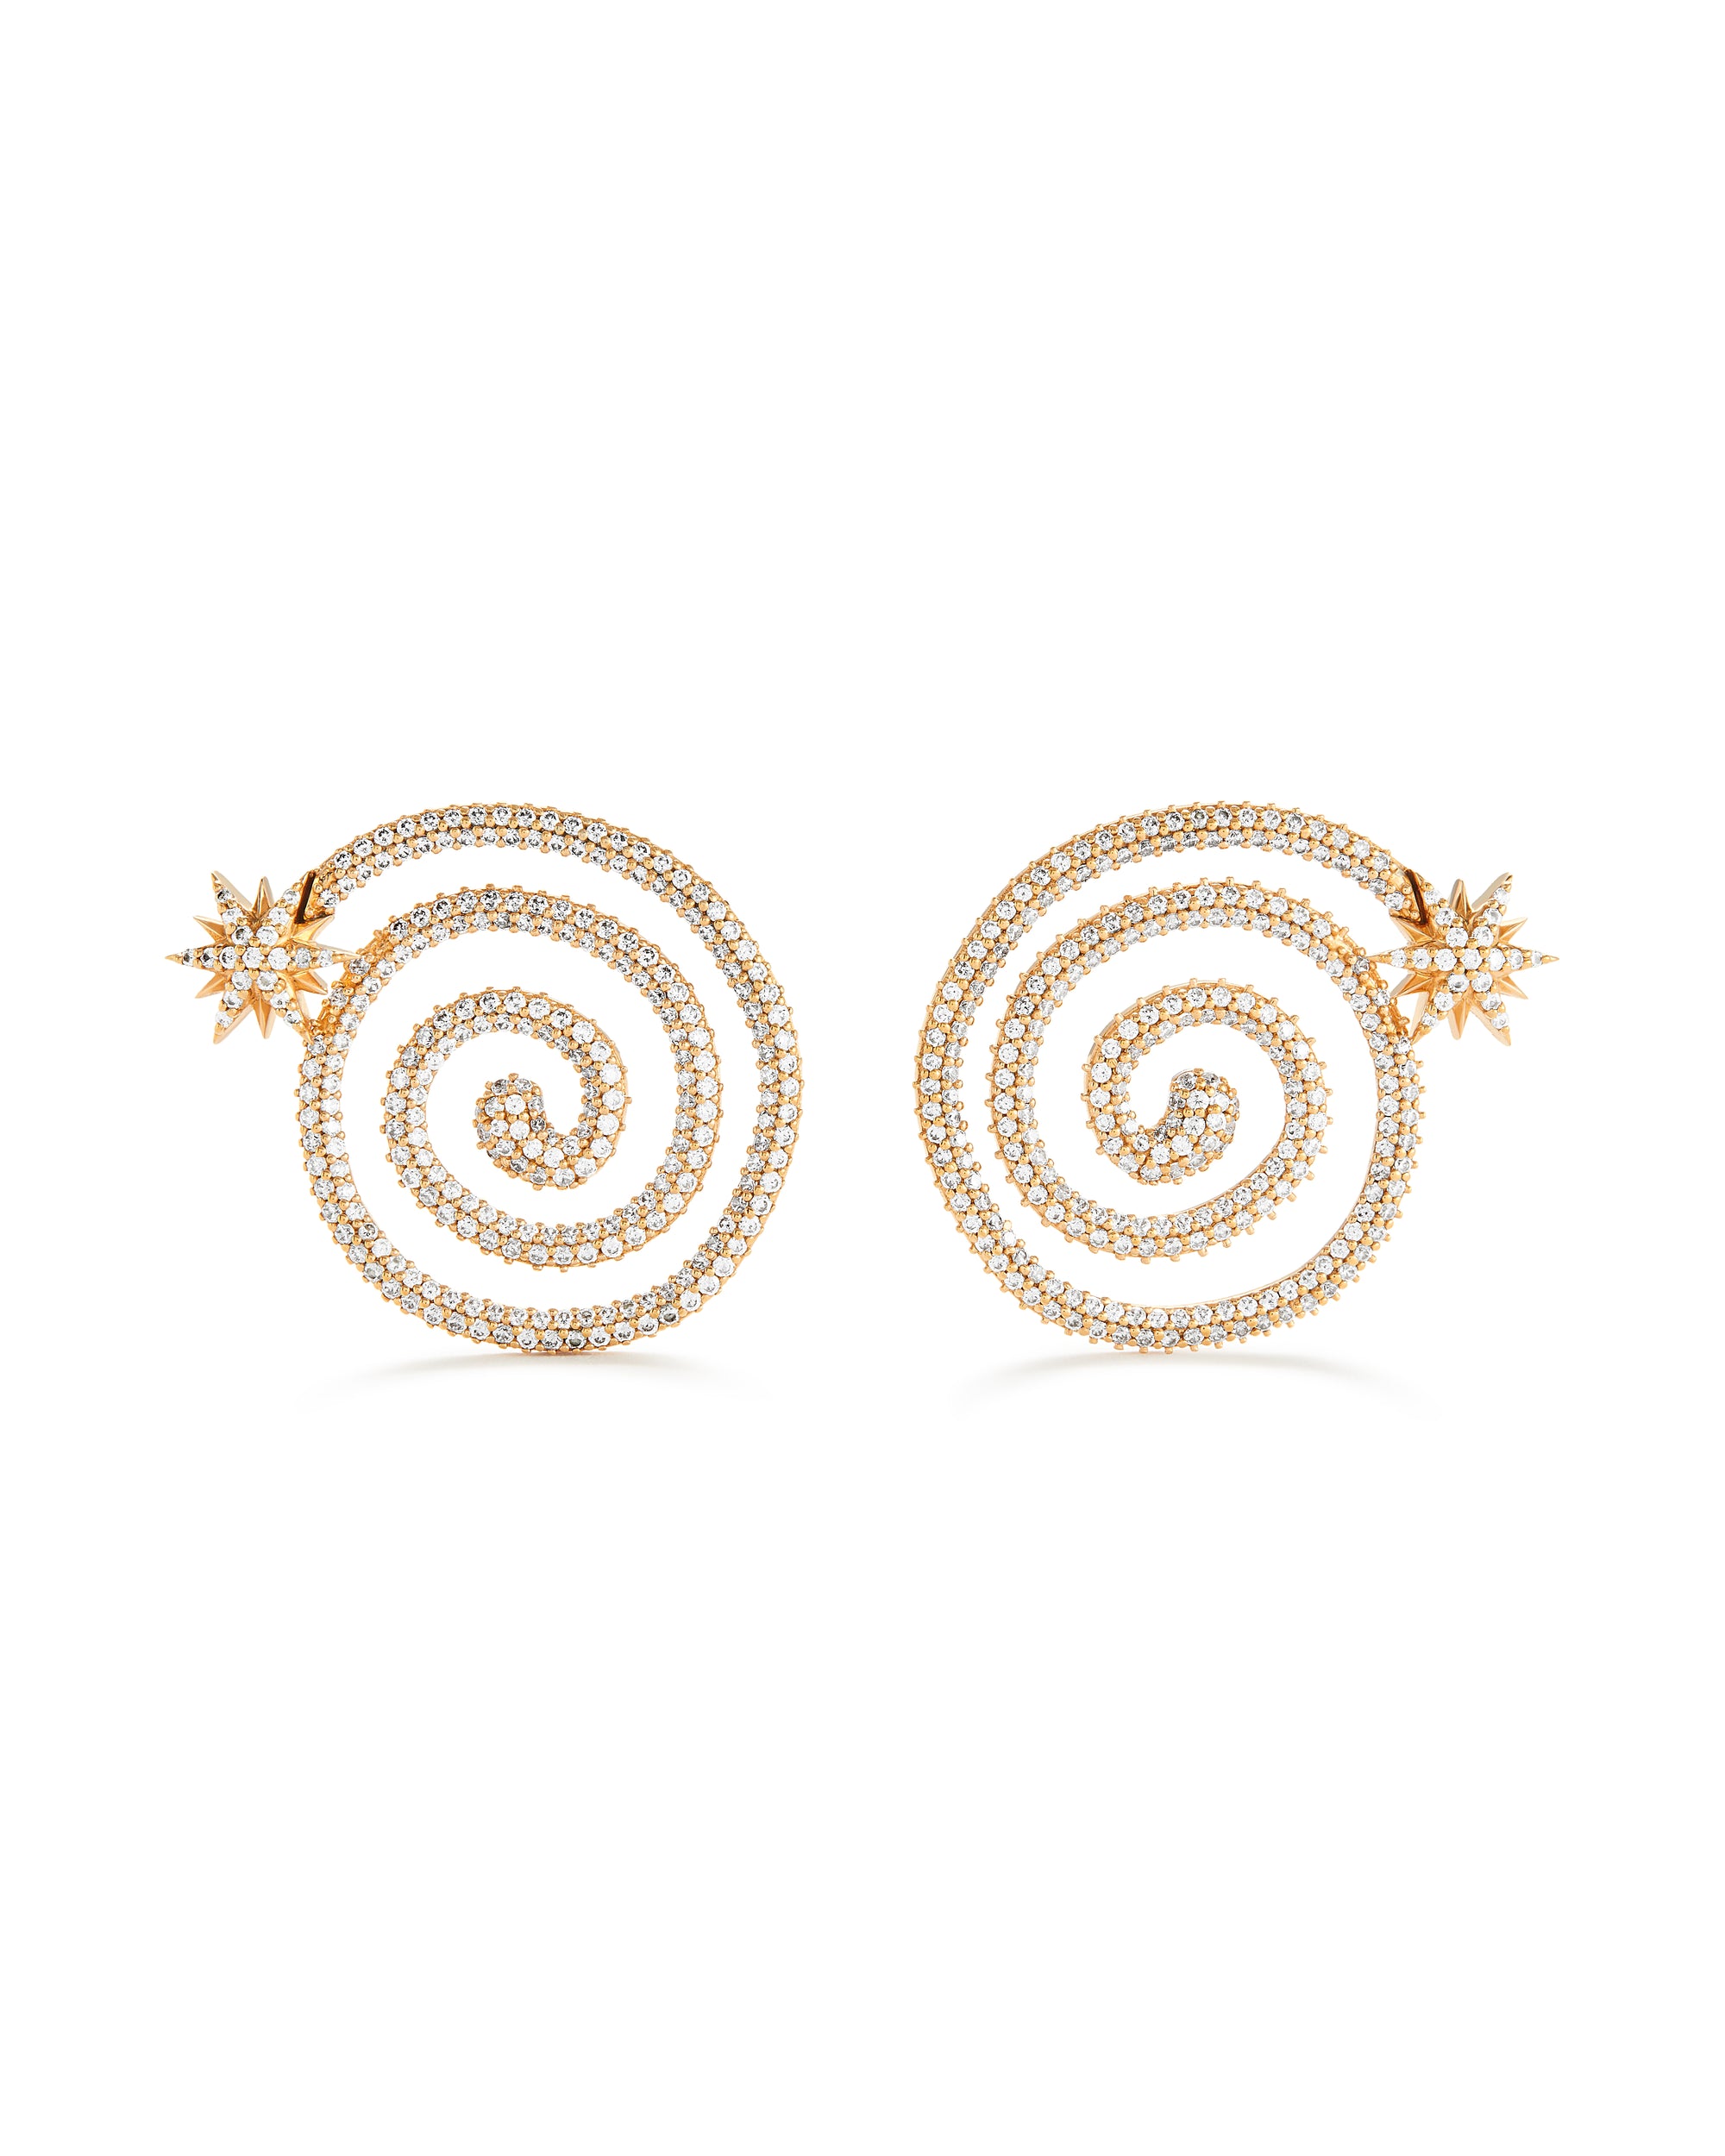 18K Yellow Gold "Continuum" Spiral Earrings